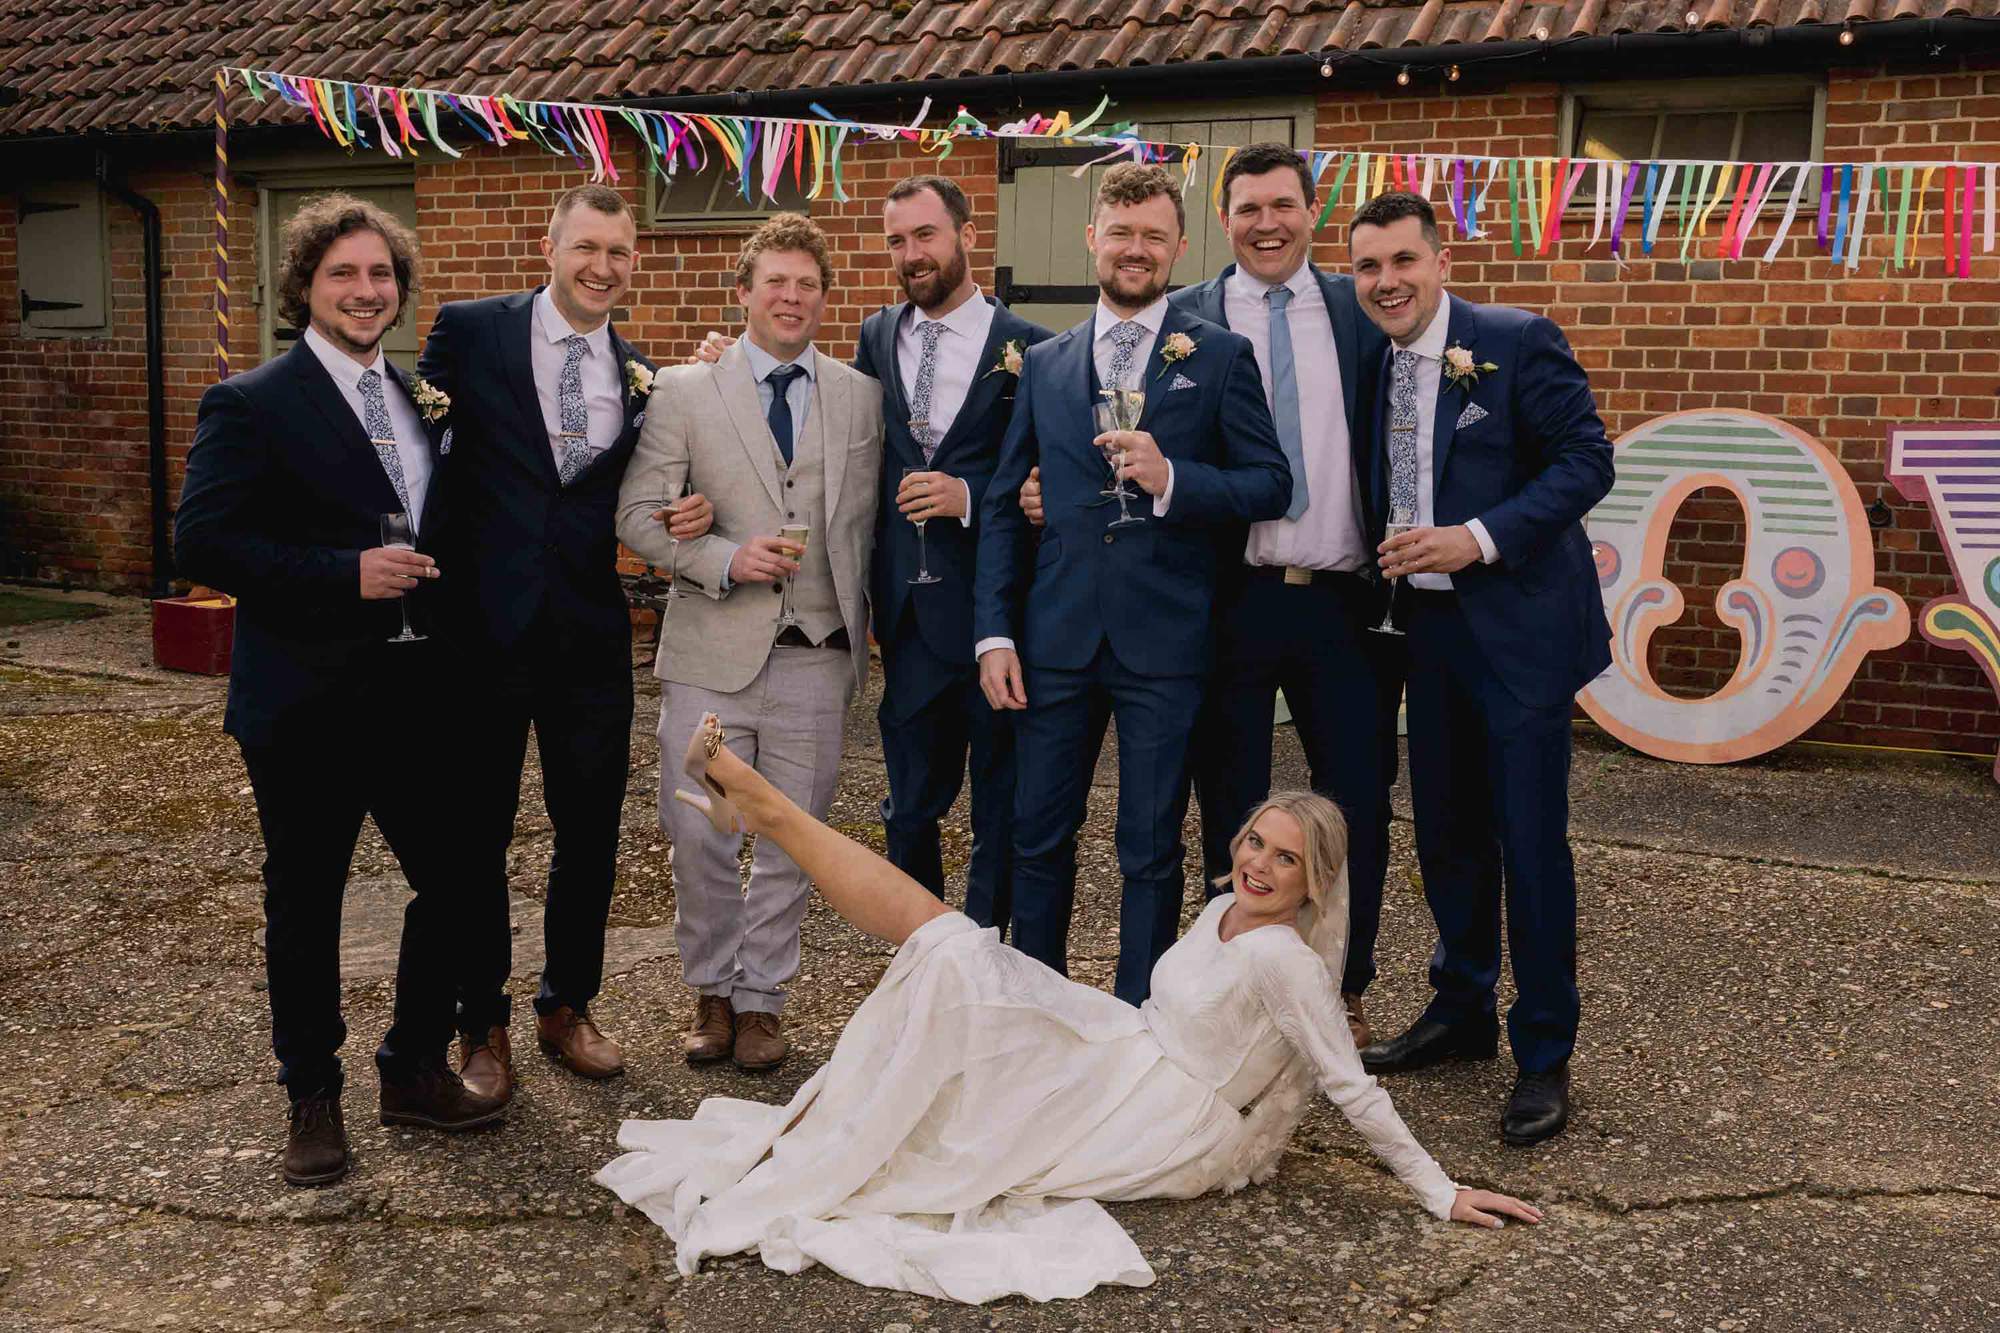 Bride pulls an elaborate pose with the groomsmen at a wedding Myrtles Courtyard in Surrey.